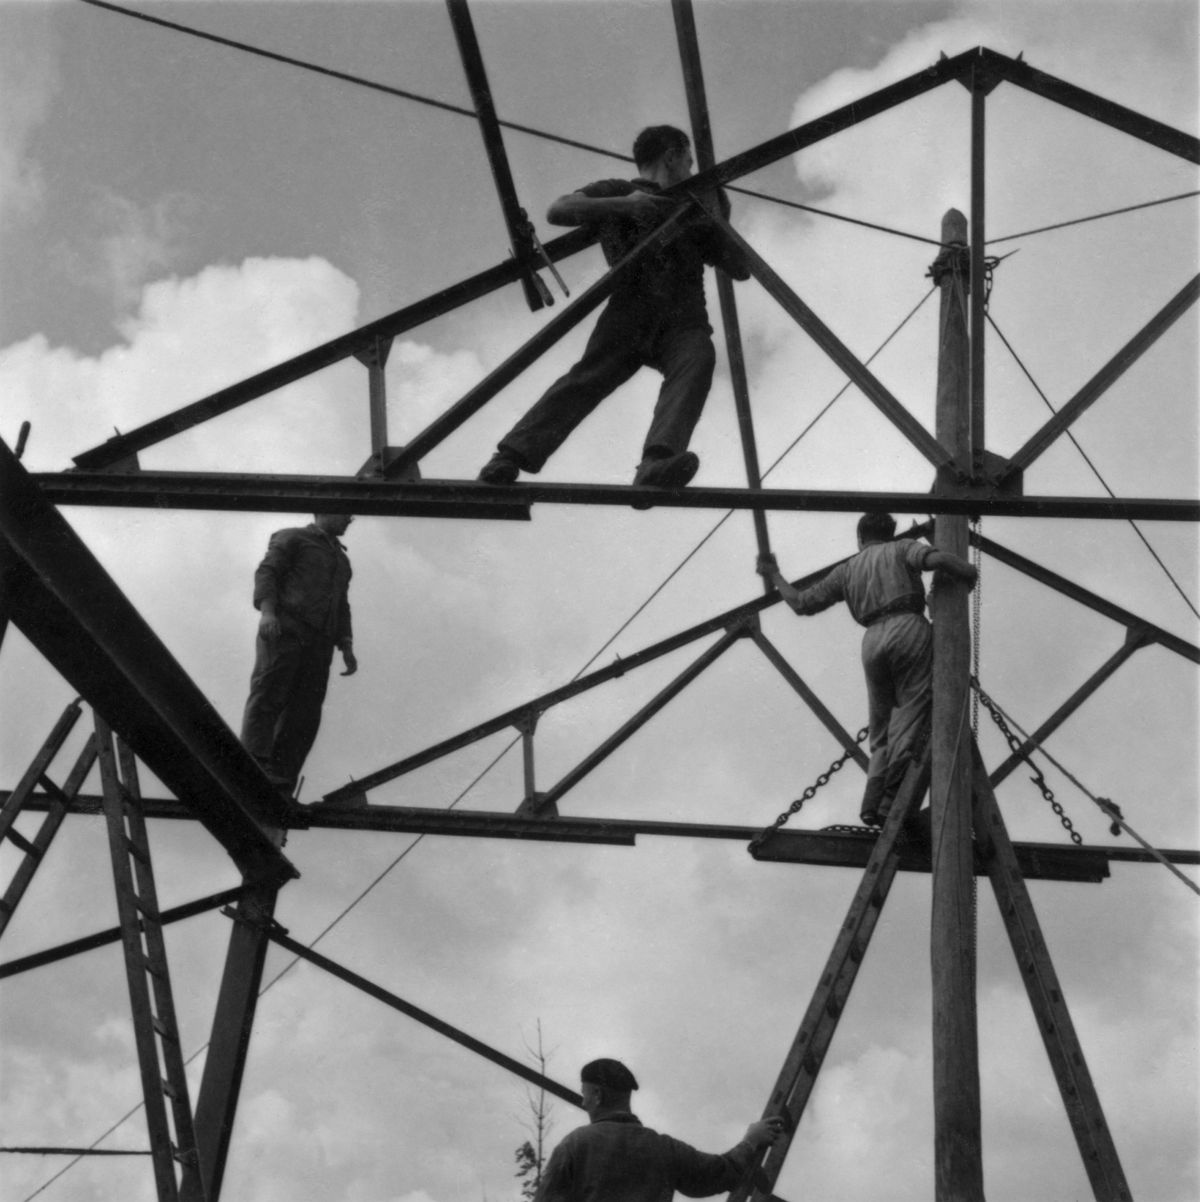 Roman Vishniac, [Zionist youth building a school and foundry while learning construction techniques, Werkdorp Nieuwesluis, Wieringermeer, The Netherlands], 1939. Gelatin silver print. © Mara Vishniac Kohn, courtesy International Center of Photography.